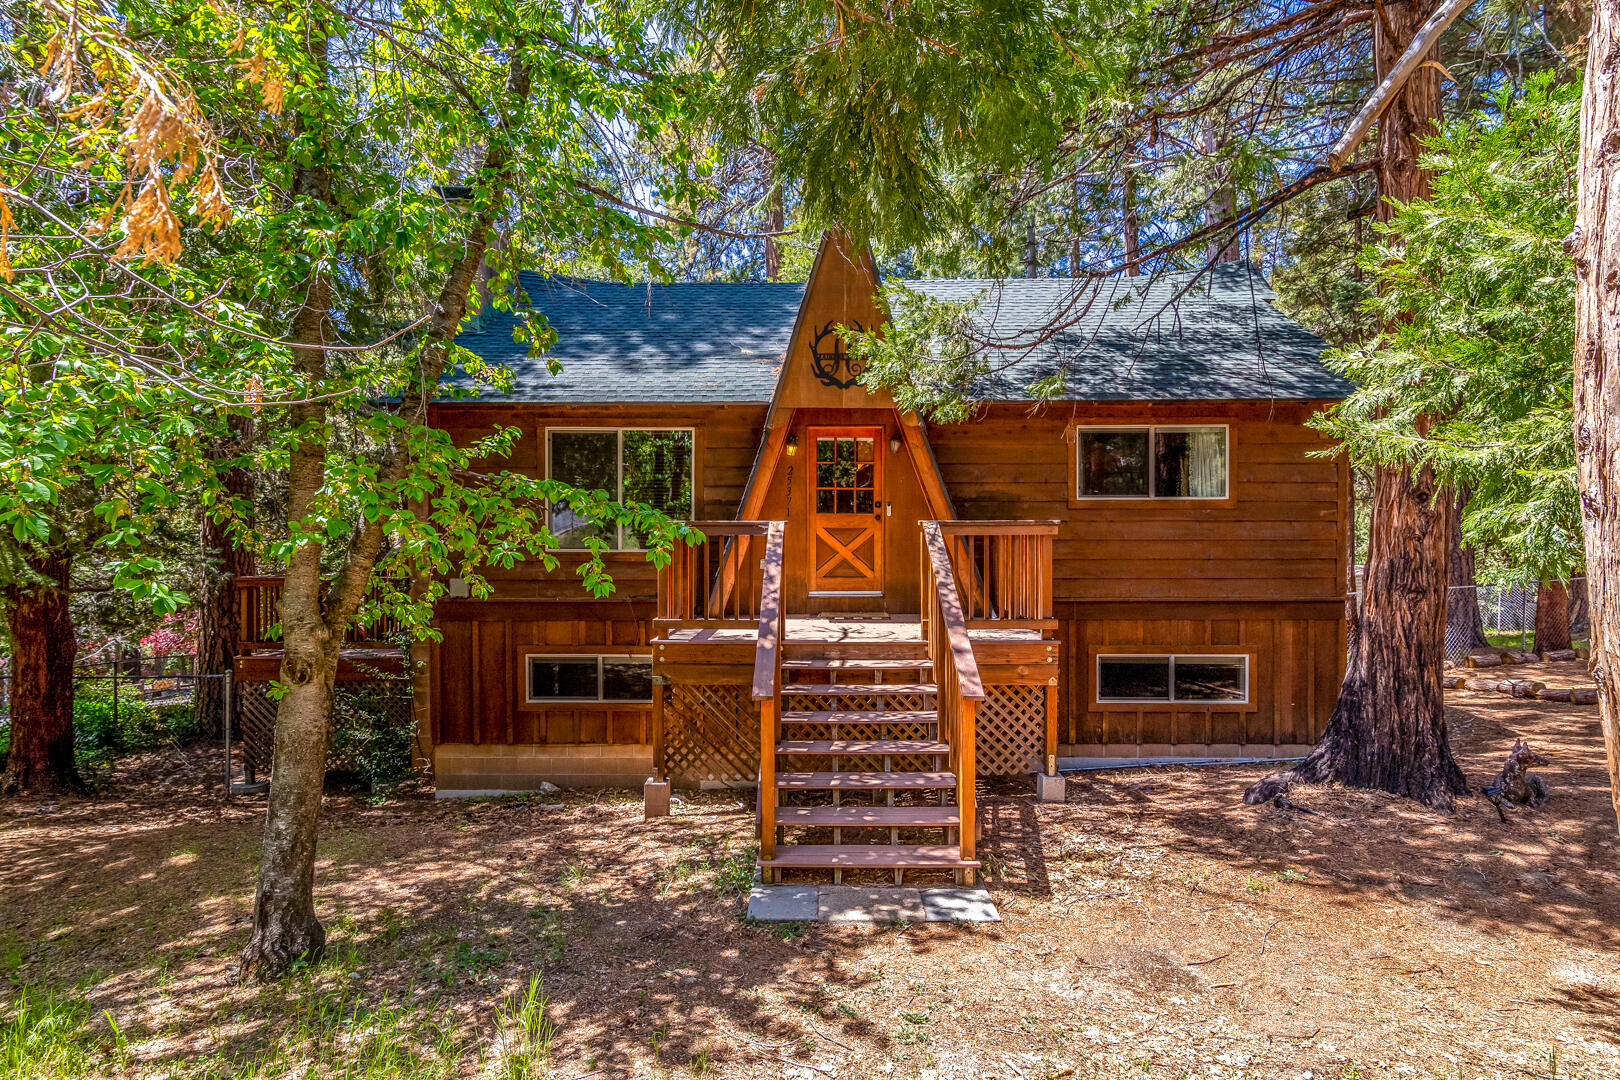 Beautifully updated TURN-KEY cabin, corner lot, in the prime location of Fern Valley. This cabin sits on 1/3 of an acre with ample space for RV/boat parking. 4-bedroom 2-bathroom home offers over 2,000 sq feet of living space. From the moment you walk in you are greeted by a large living room with stunning rock fireplace, new flooring and gourmet kitchen recently remodeled with granite counter tops, large island, wood stove & more. The kitchen flows nicely into the formal dining, large enough to seat the entire family. The wrap around composite deck can be accessed from the kitchen/family room or the dining room. Incredible views from the deck doubling as the indoor/outdoor living concept we love! First level of the home has the Primary bedroom and a full bathroom. Downstairs, offers a second fireplace, spacious living room, 3 additional bedrooms and 3/4 bath. The options for the place are endless. The lower level has its own private entrance. Use them both as two separate short-term rentals. Live in one rent out the other. Owner has installed new HVAC system, added a large driveway, and furnished this home to sleep 12 people comfortably. This cabin is less than a mile from town!